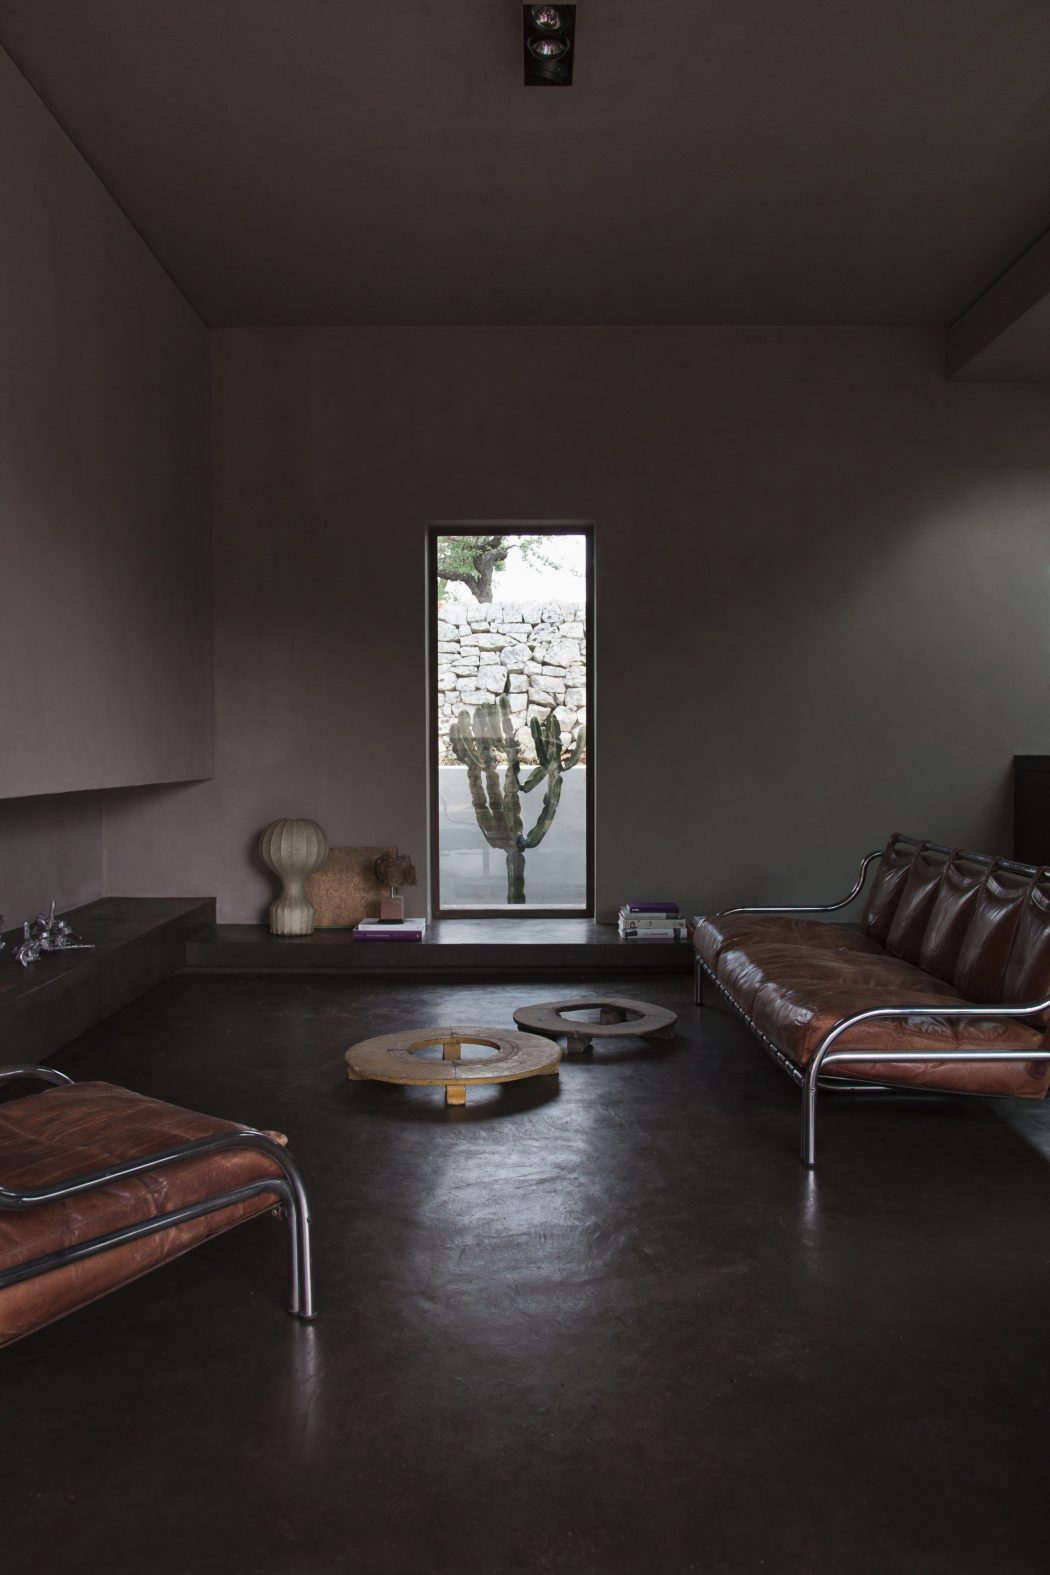 Minimalist, earthy-toned living room with leather couches, artwork, and a large window.